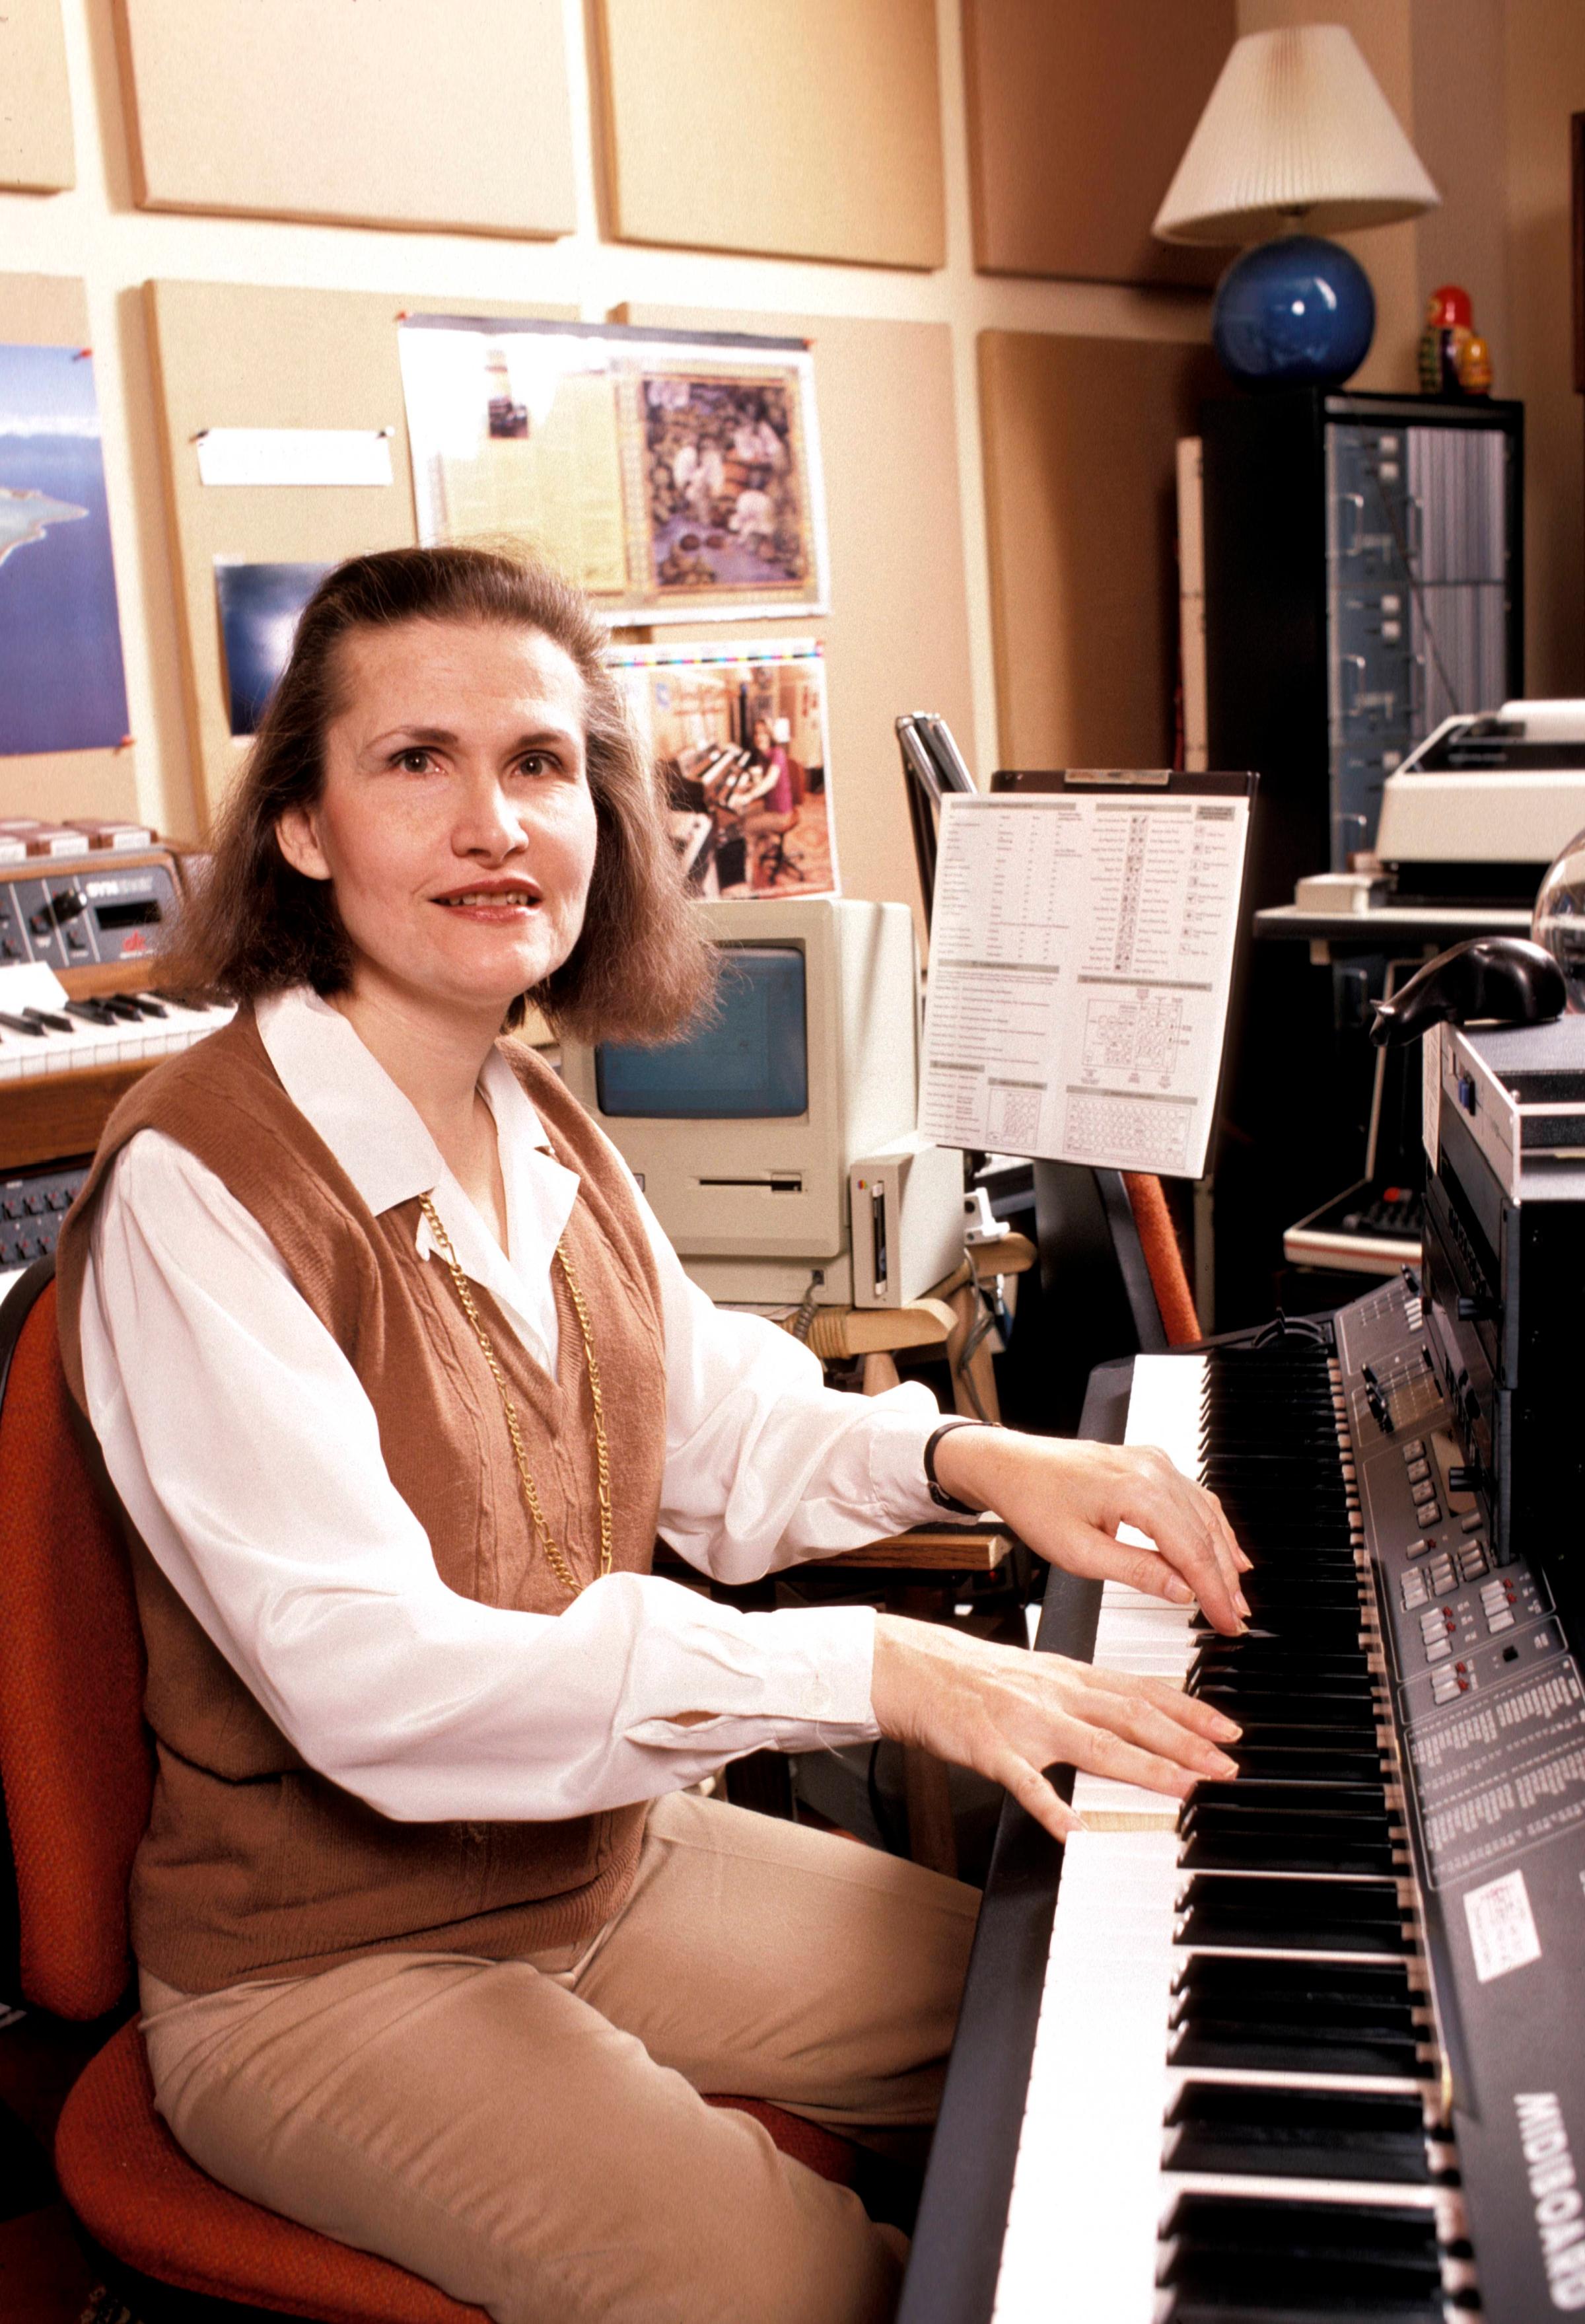 The electronic musician Wendy Carlos, formerly Walter, released Switched-On Bach in 1968, which won three Grammy awards and became one of the first classical albums to sell 500,000 copies. She went on to compose notable scores for films like A Clockwork Orange, The Shining, and Tron.